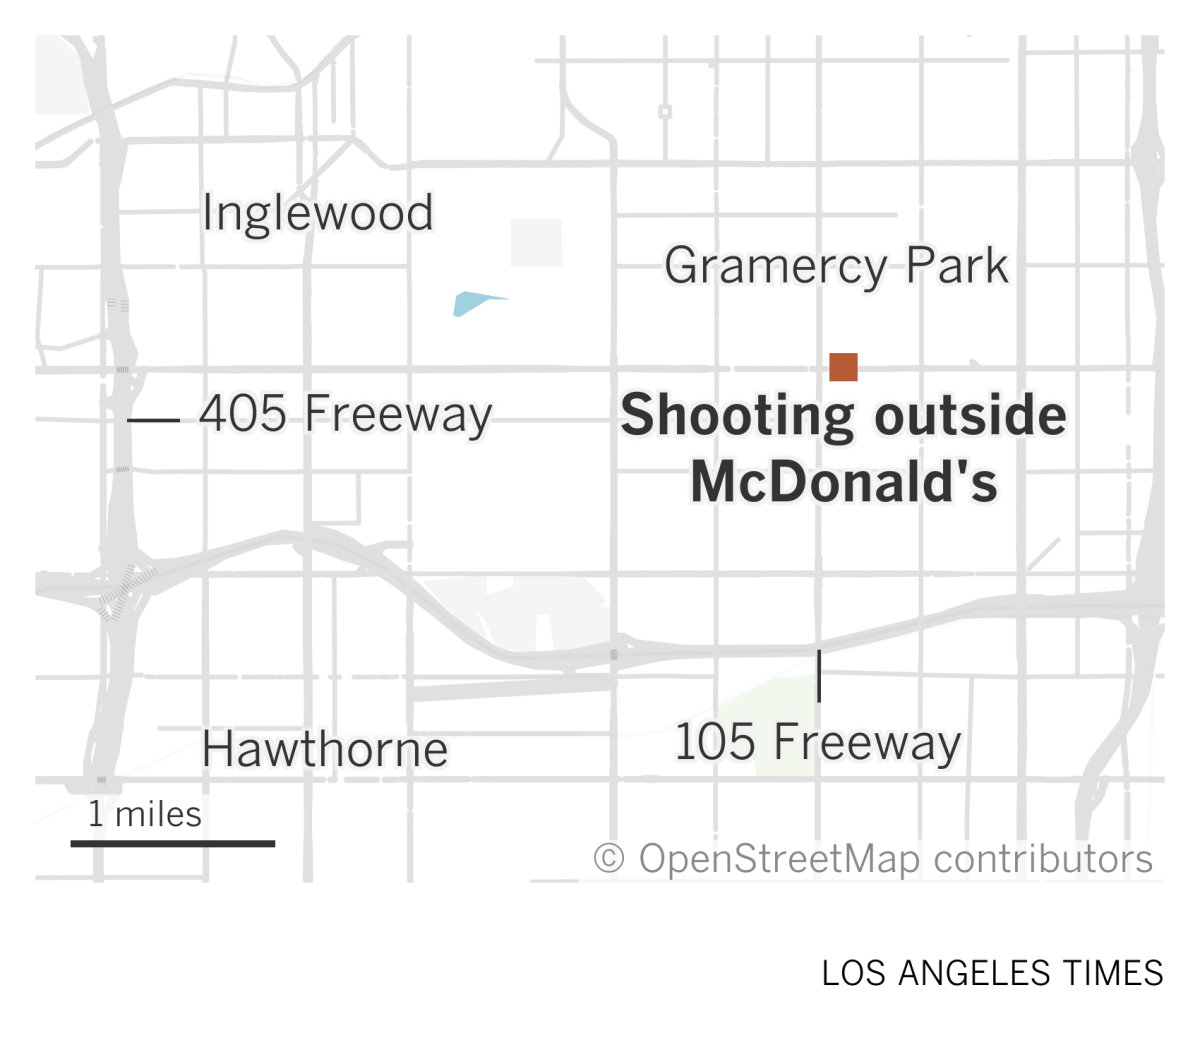 A map of South L.A. showing the location of a shooting outside a McDonald's restaurant in the Gramercy Park neighborhood